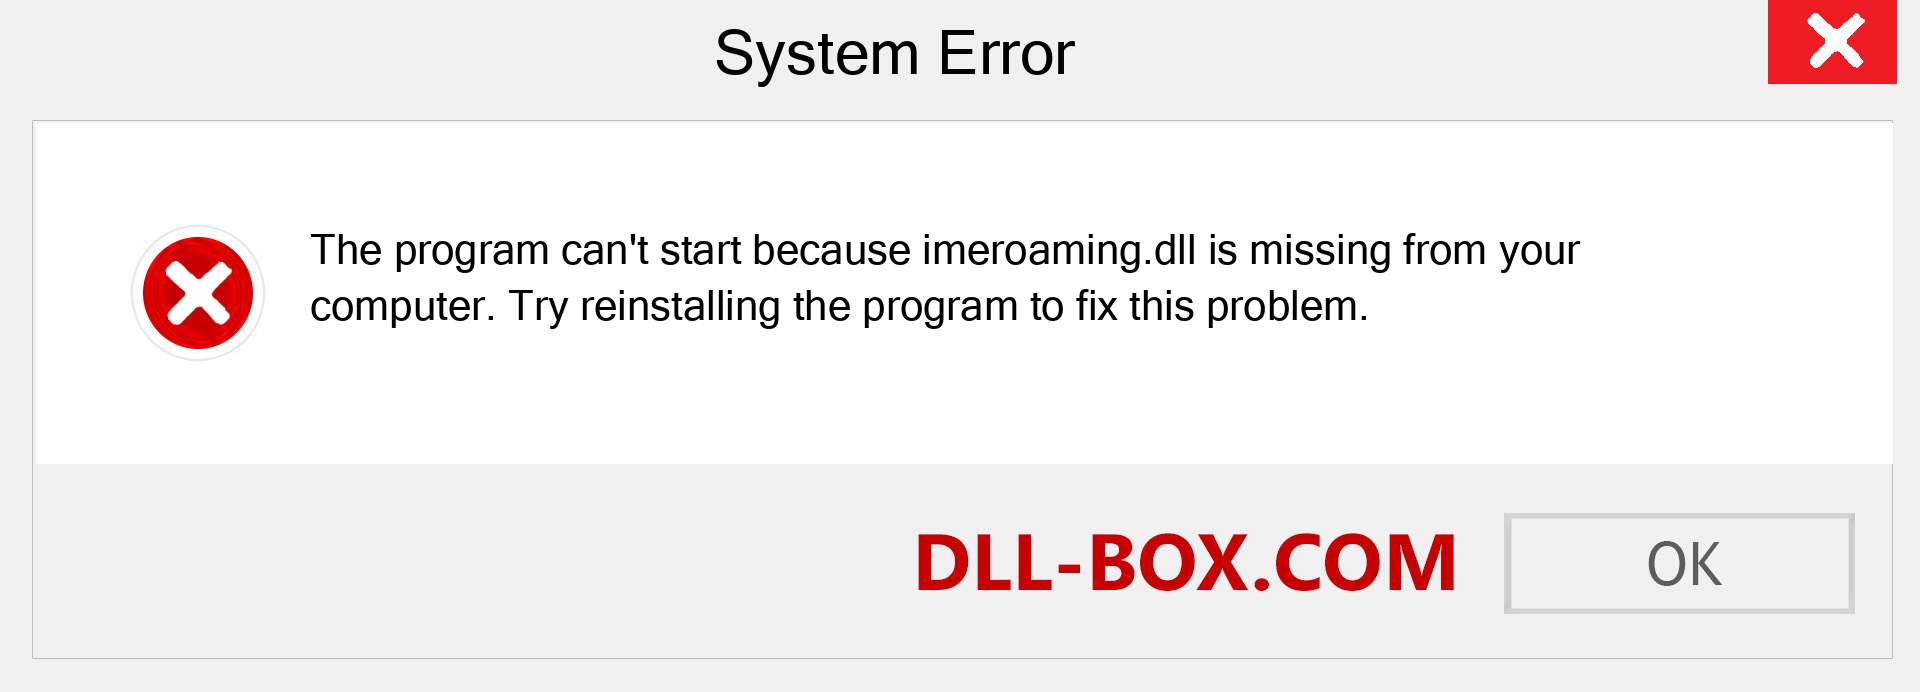  imeroaming.dll file is missing?. Download for Windows 7, 8, 10 - Fix  imeroaming dll Missing Error on Windows, photos, images